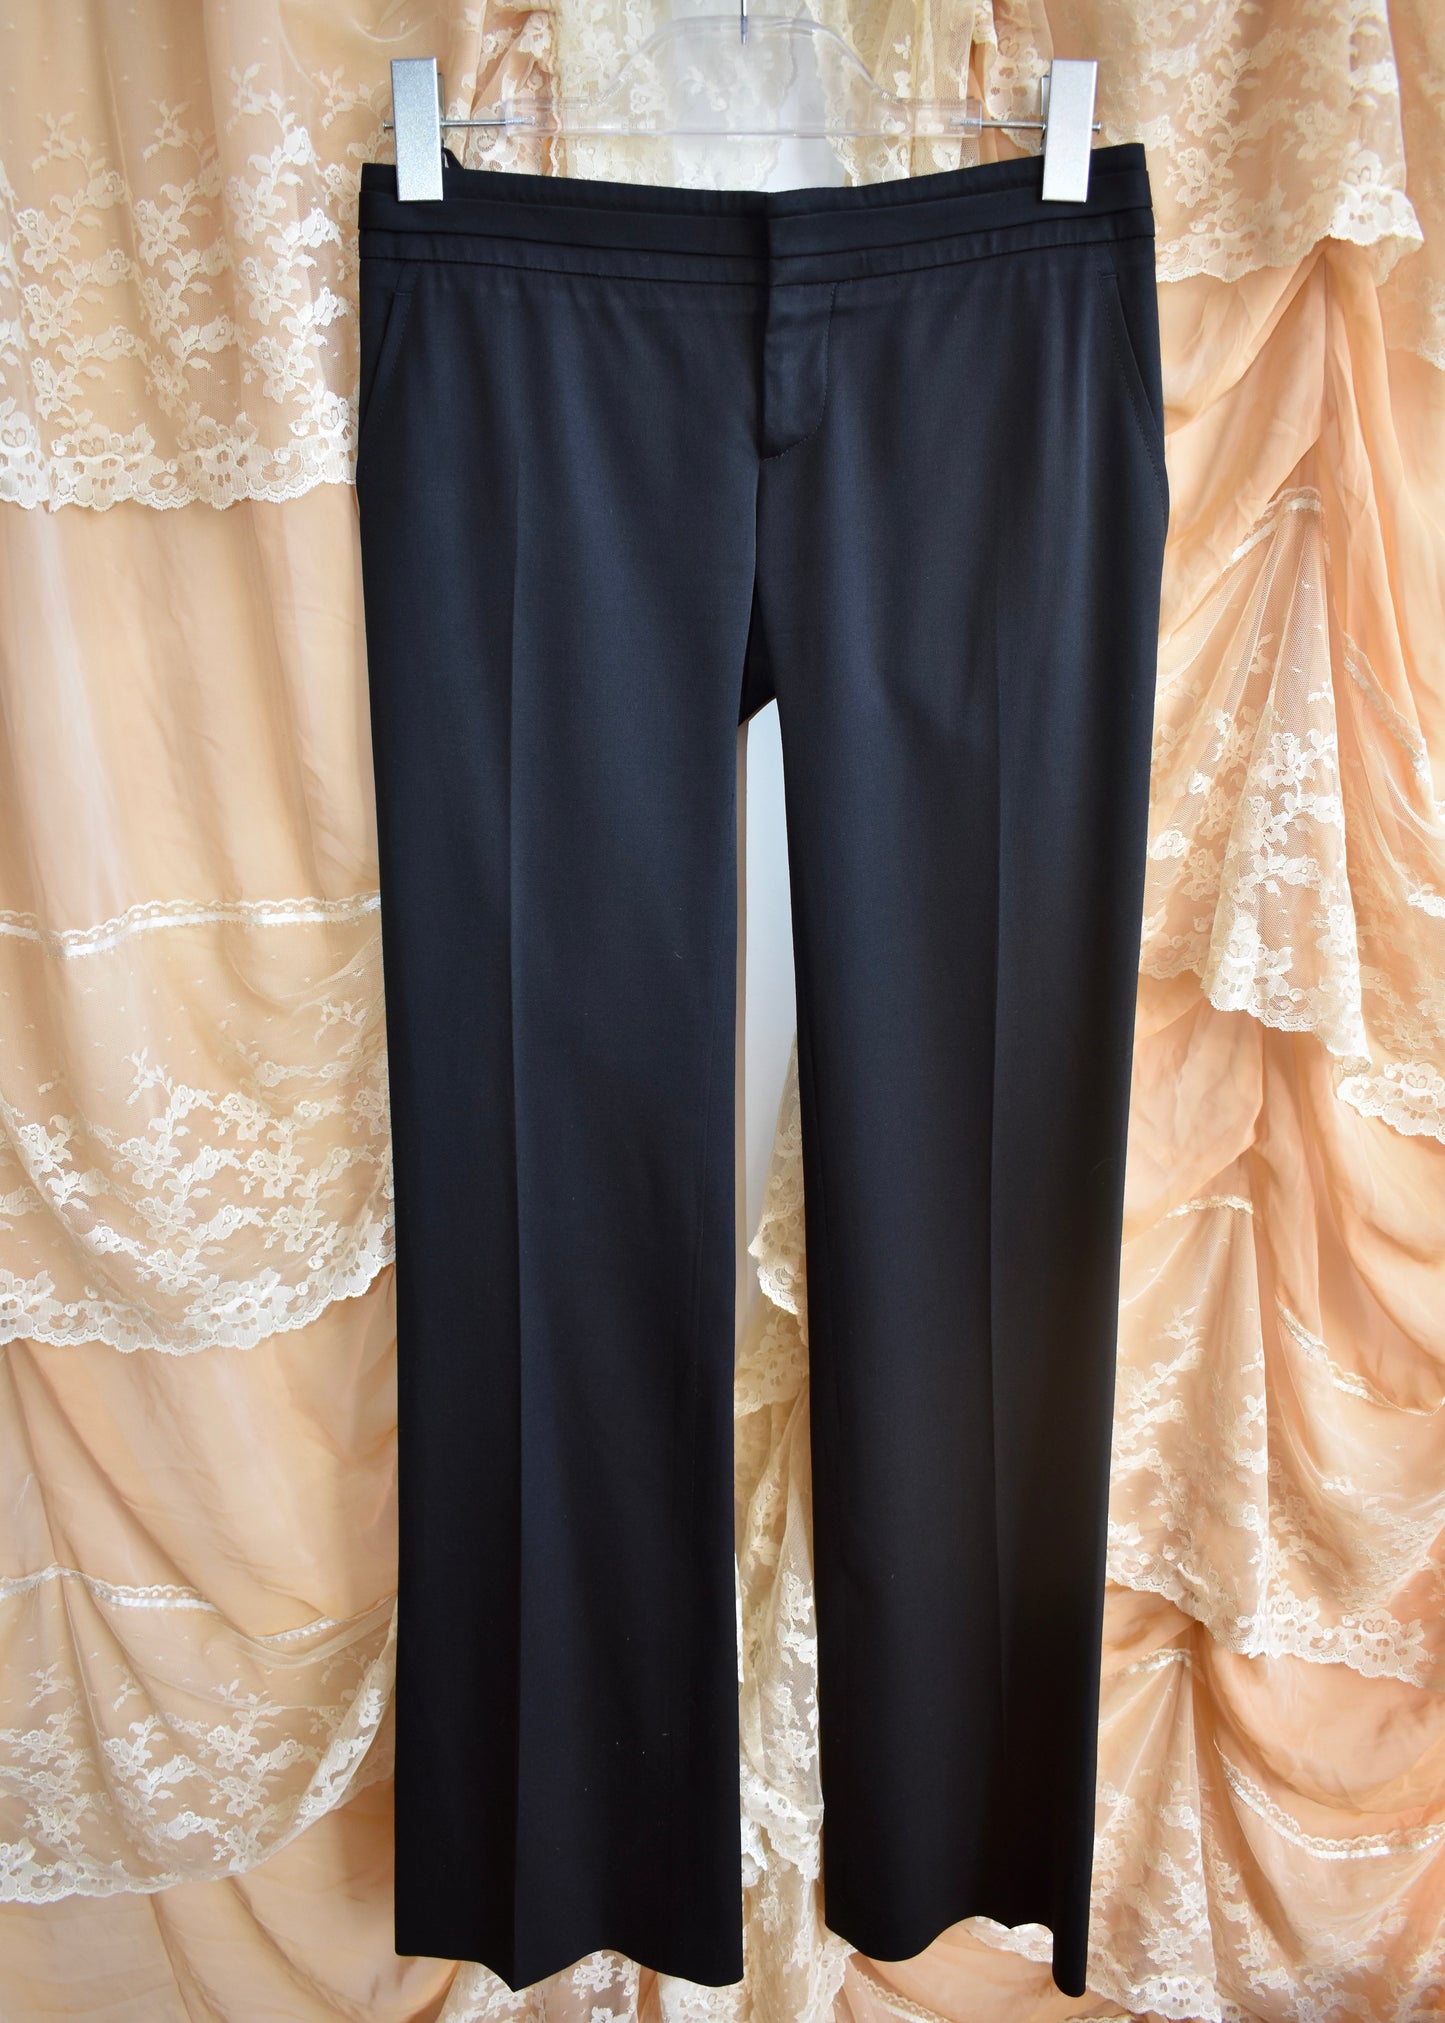 Gucci By Tom Ford Black Trousers with GG Emblem